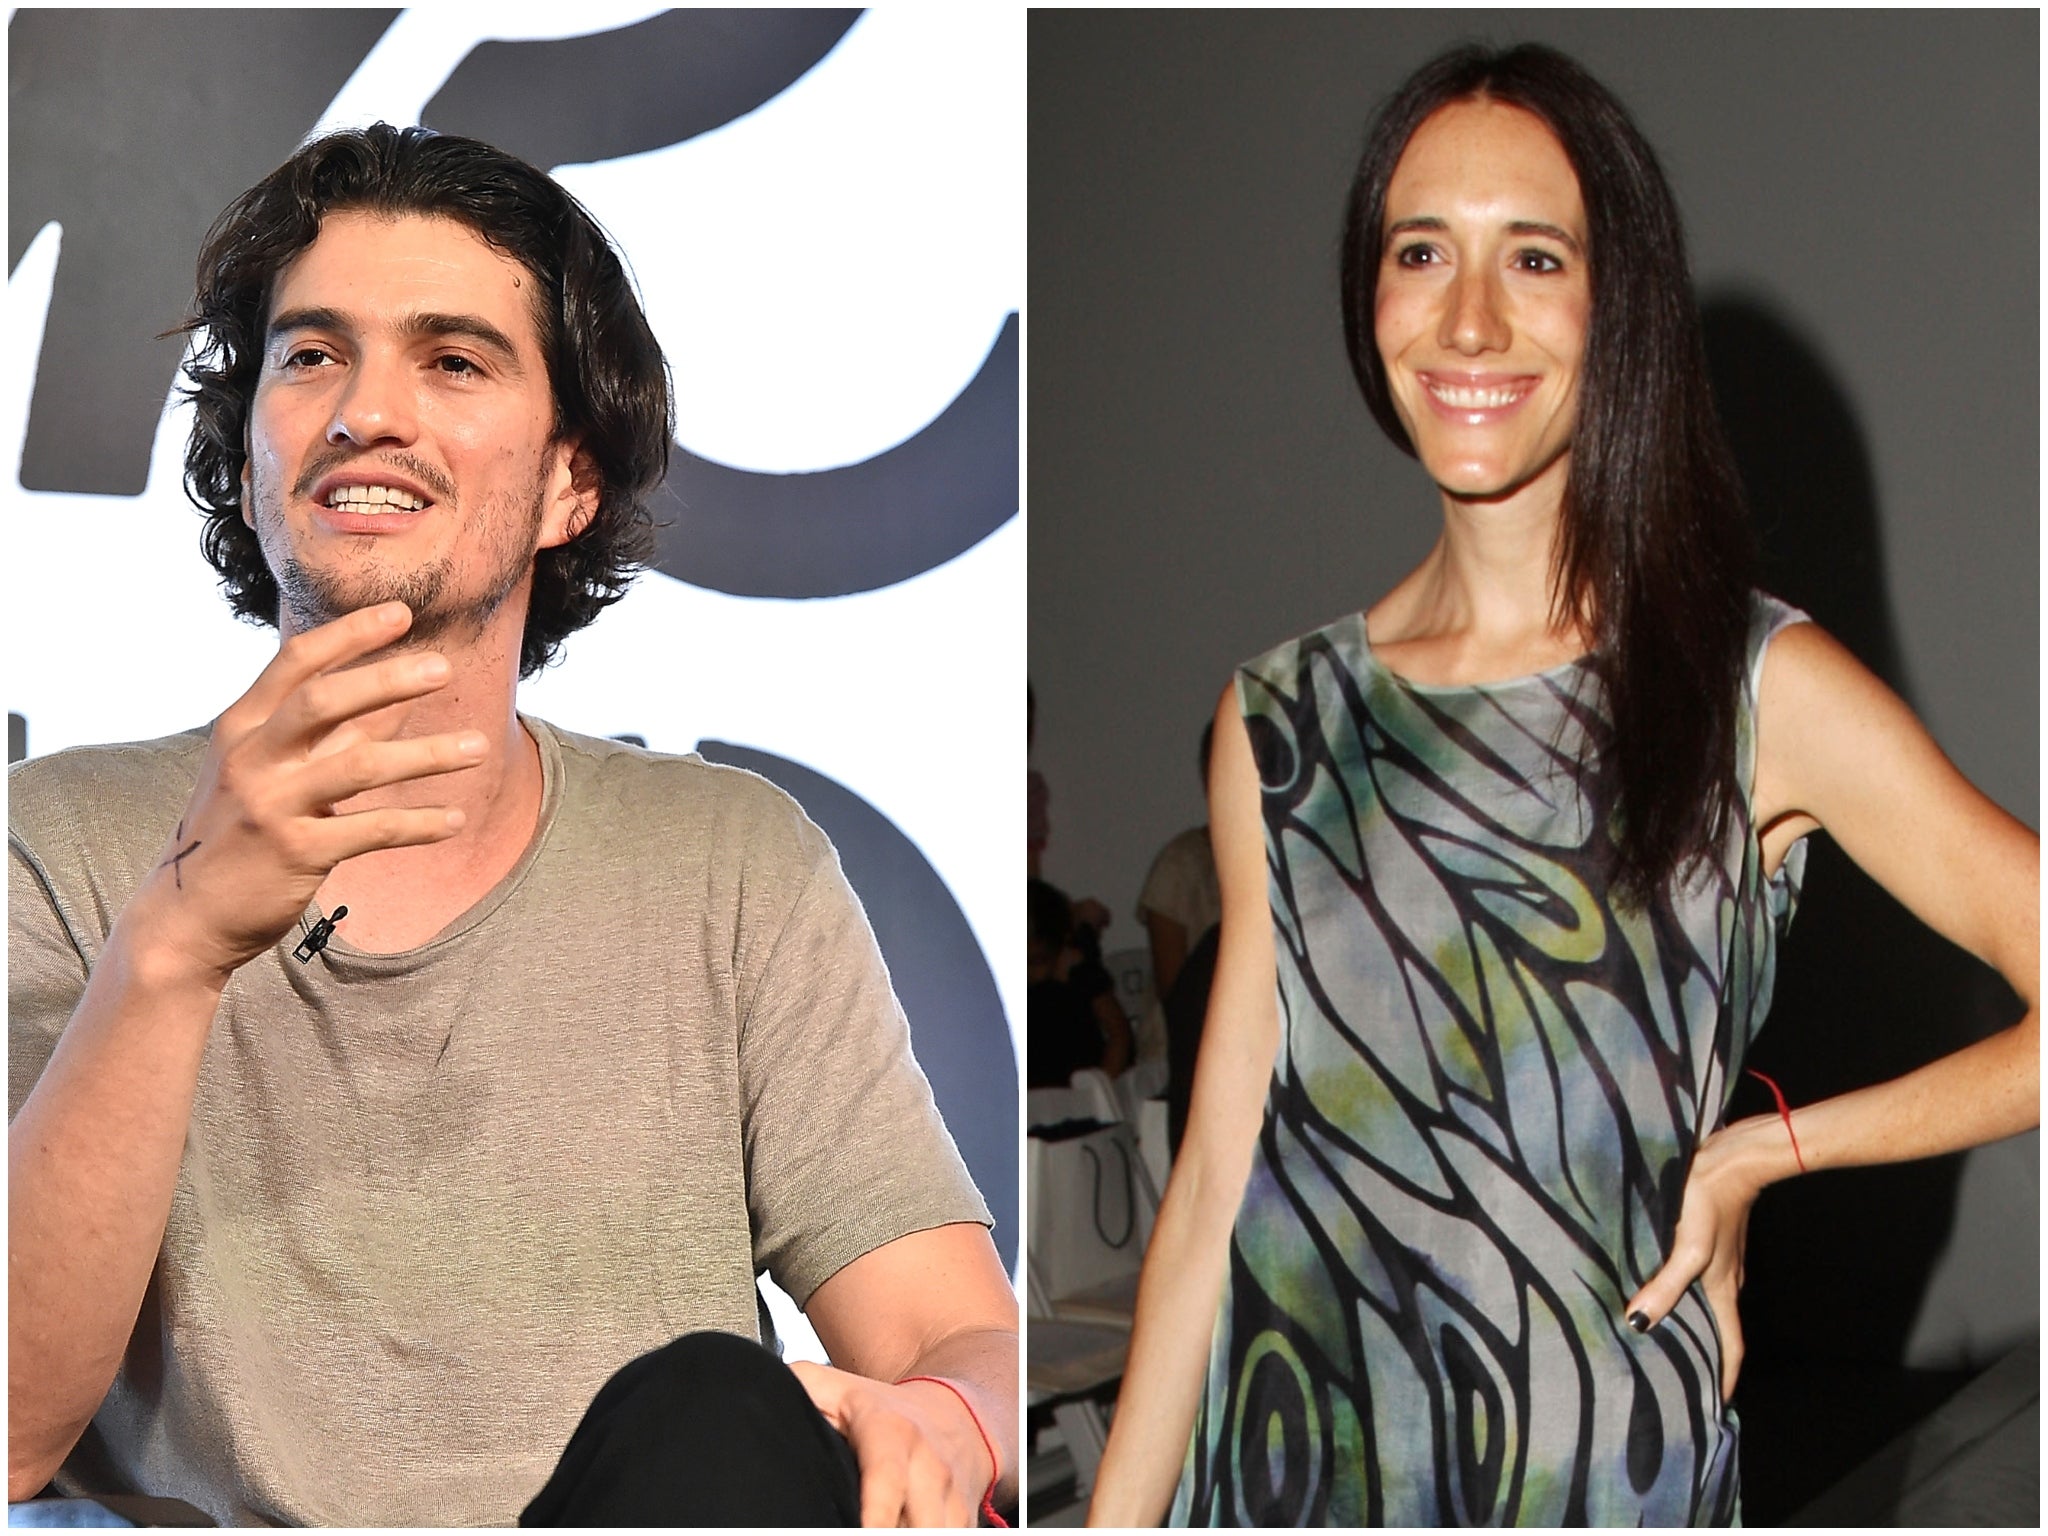 Adam Neumann in 2016 (left) and Rebekah Neumann in 2010 (right) both wear Kabbalah’s red string on their left wrists